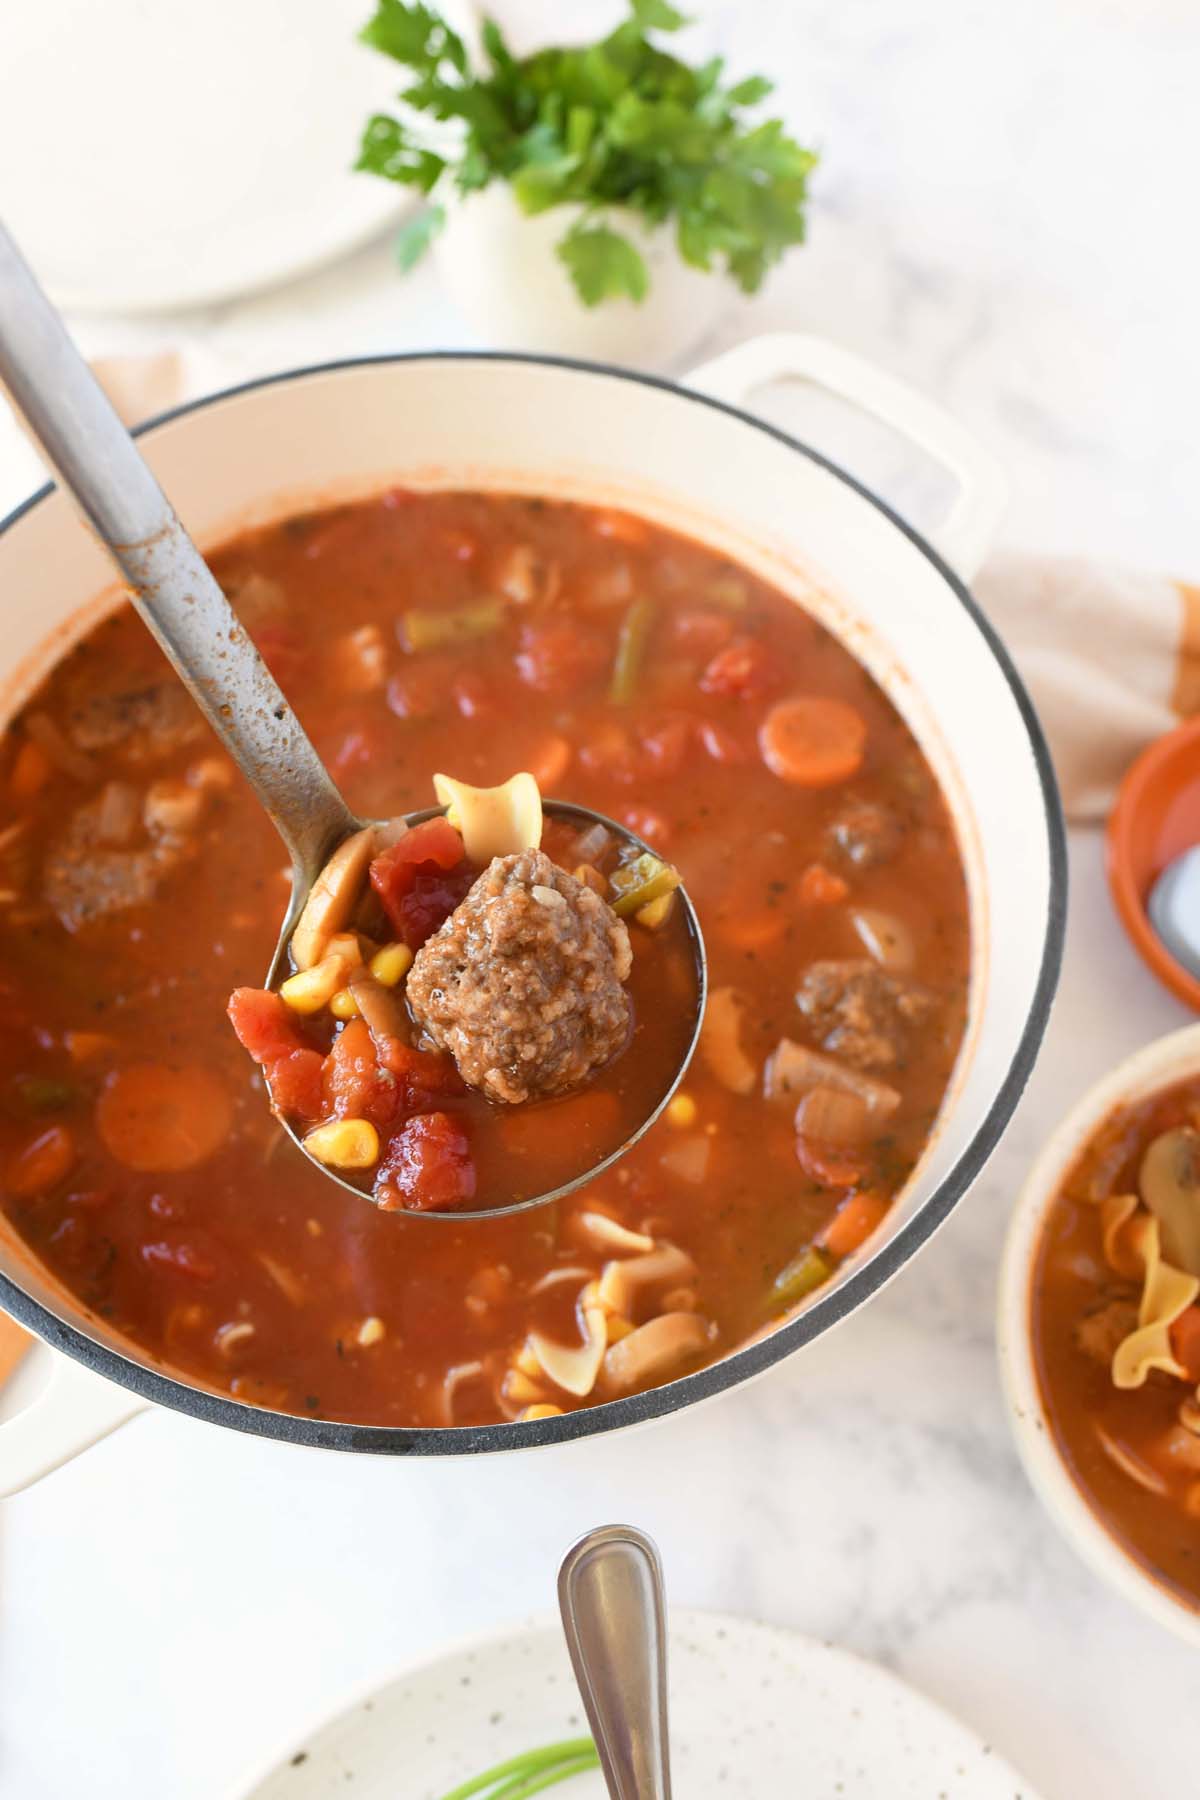 Meatball soup with vegetables on a soup ladle.  